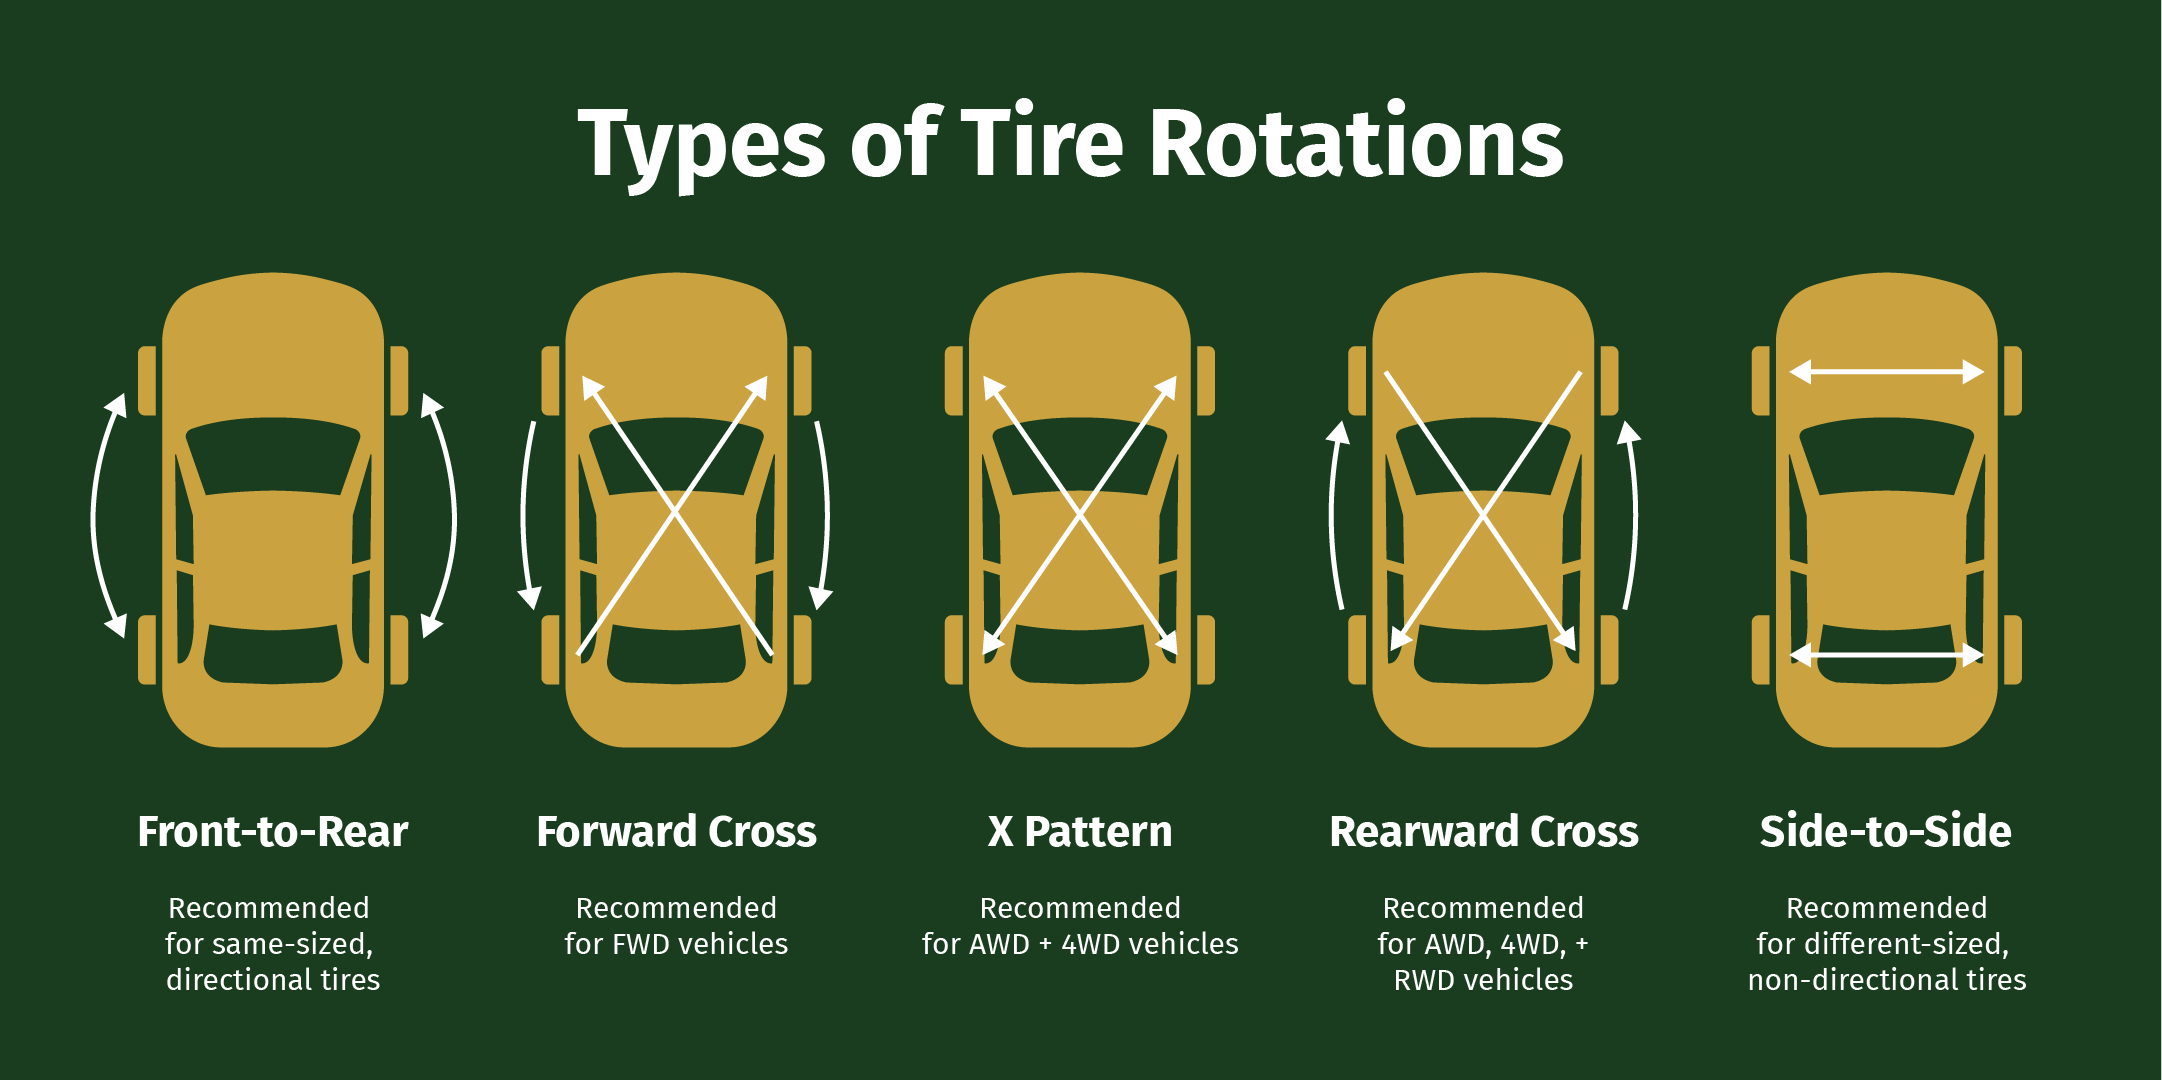 There are five main types of tire rotations including front-to-rear (for same-sized, directional tires), forward cross (For FWD vehicles), x pattern (for AWD and 4WD vehicles), rearward cross (for RWD, AWD, and 4WD), and side-to-side (for different-sized, non-directional tires).